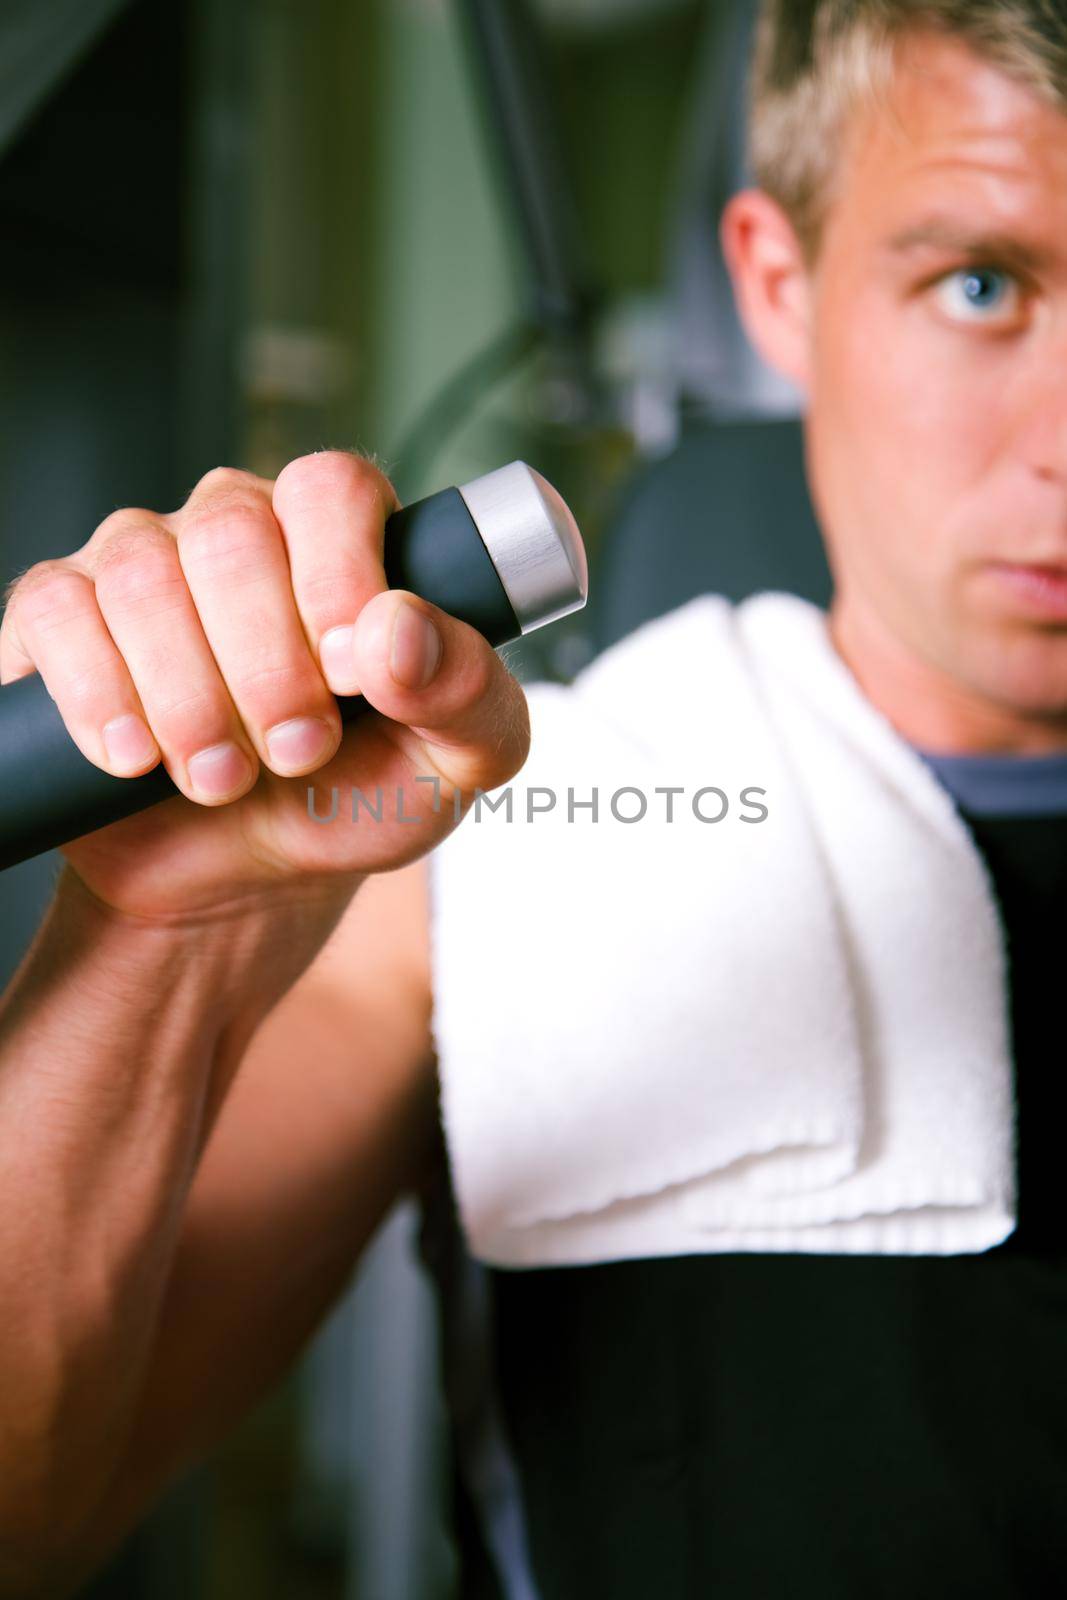 Man lifting weights in a gym, closeup on his hand